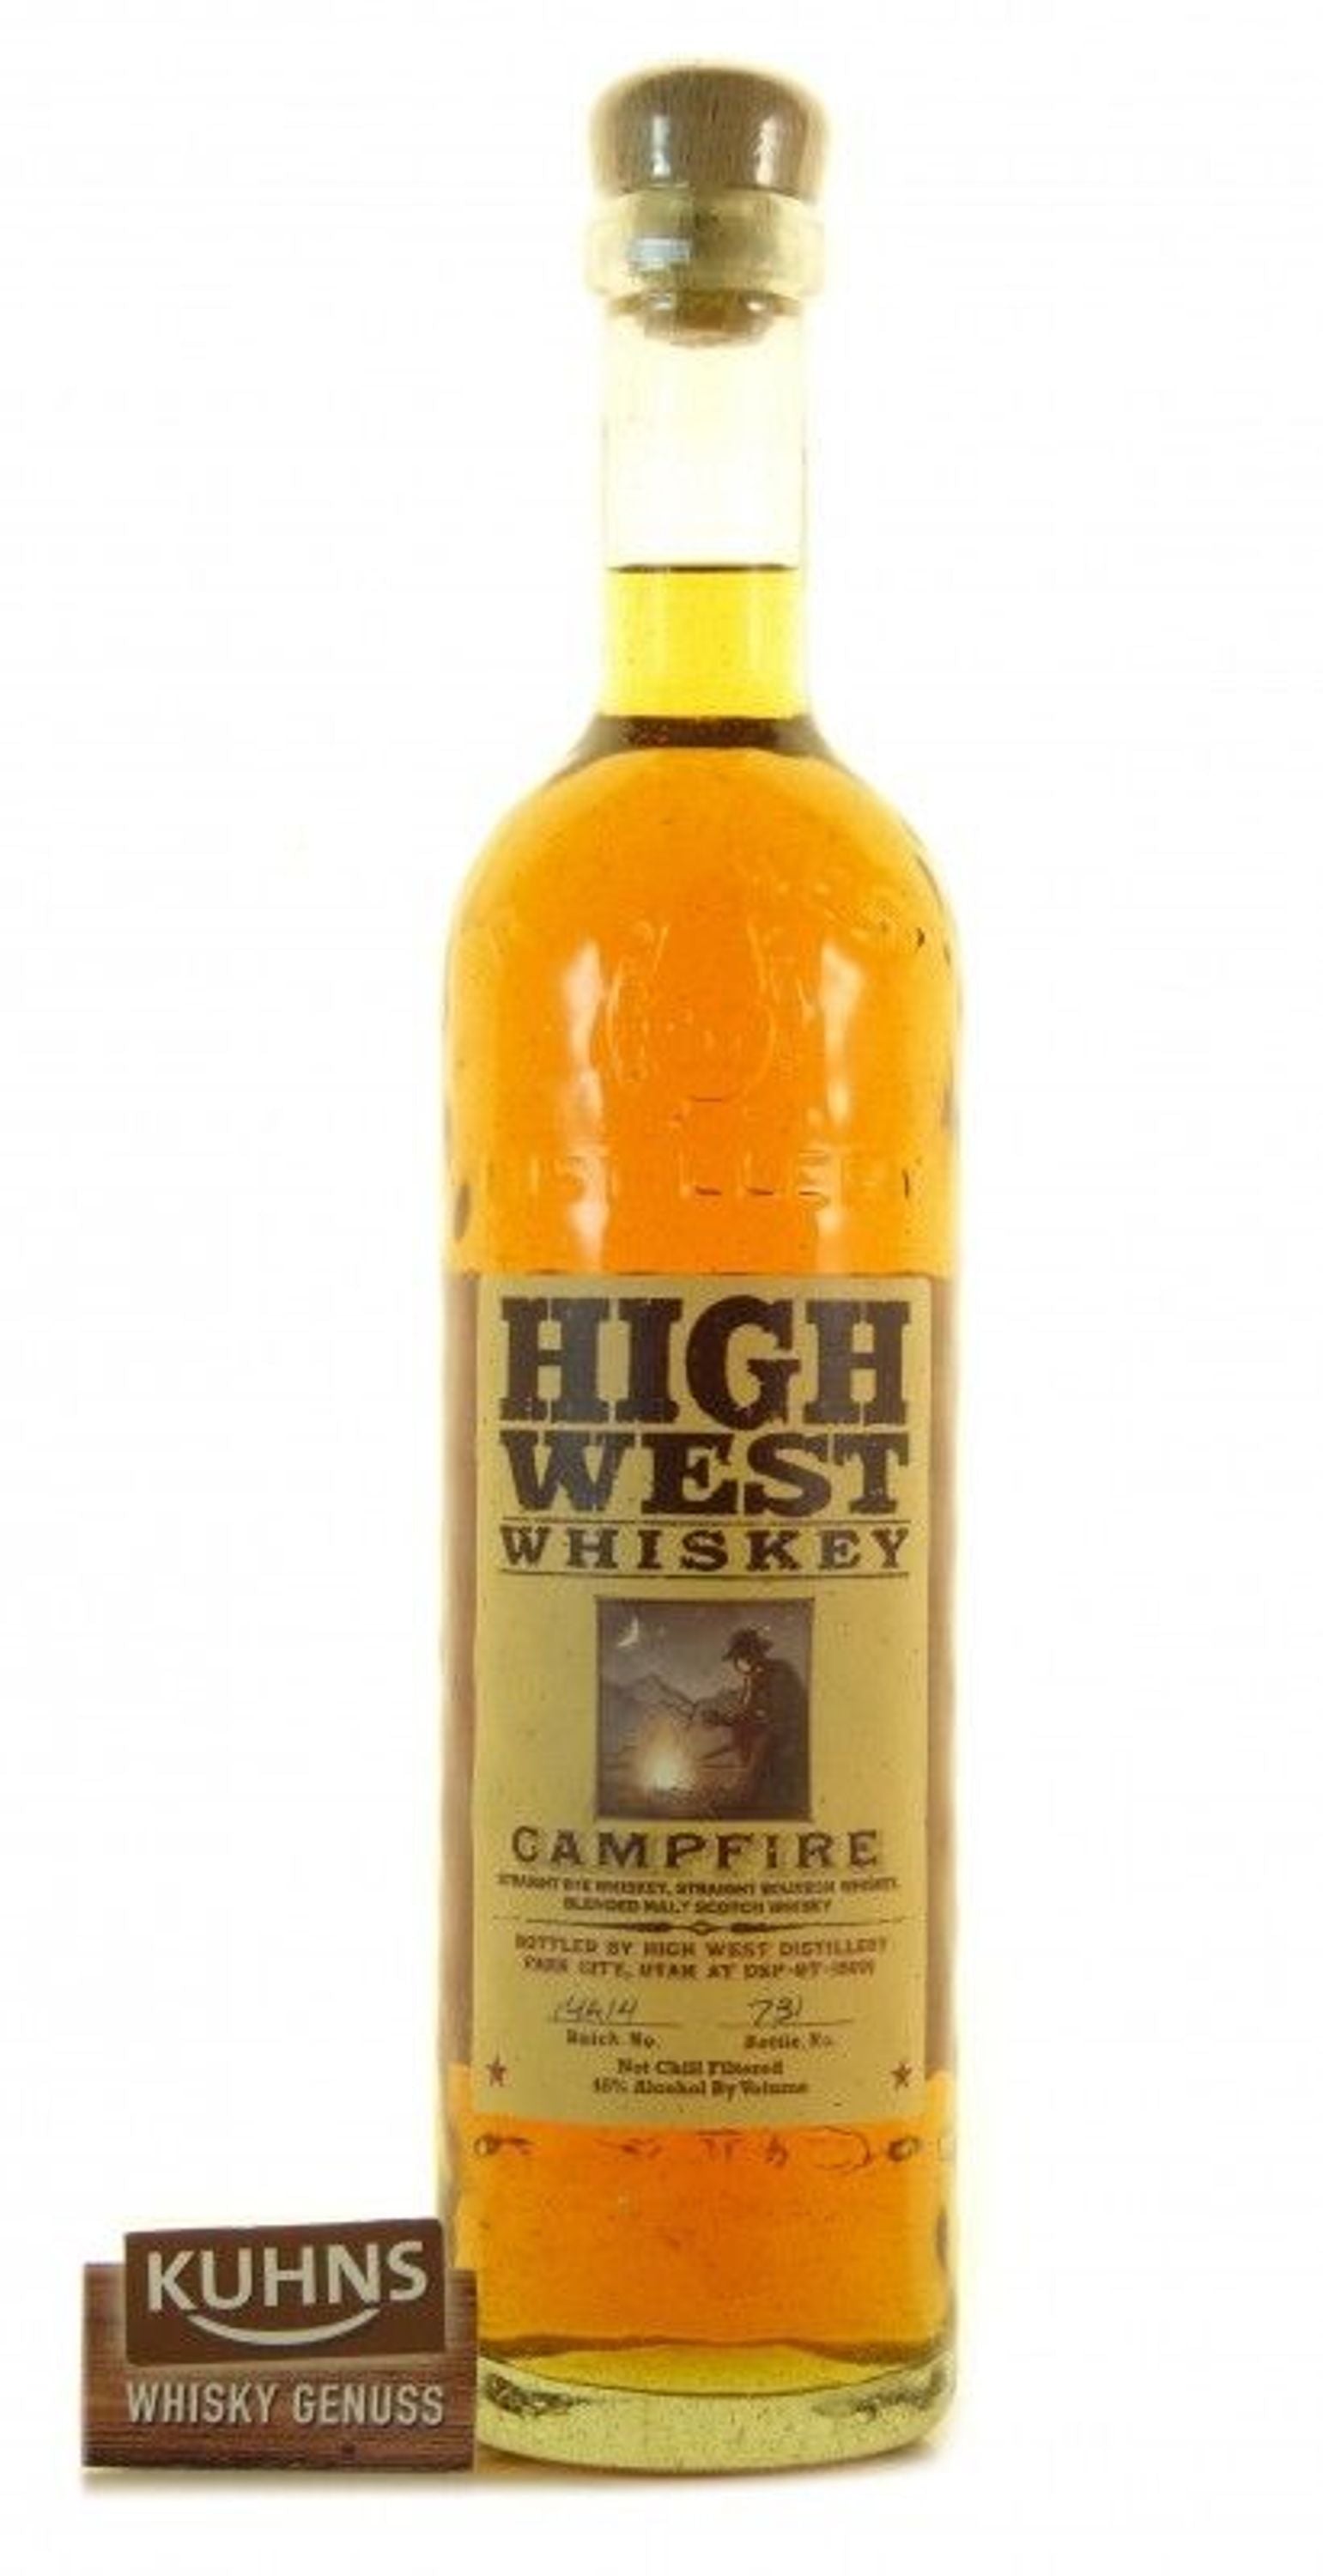 High West Campfire Whiskey 0,7l, alc. 46 Vol.-%, USA Blended Whiskey